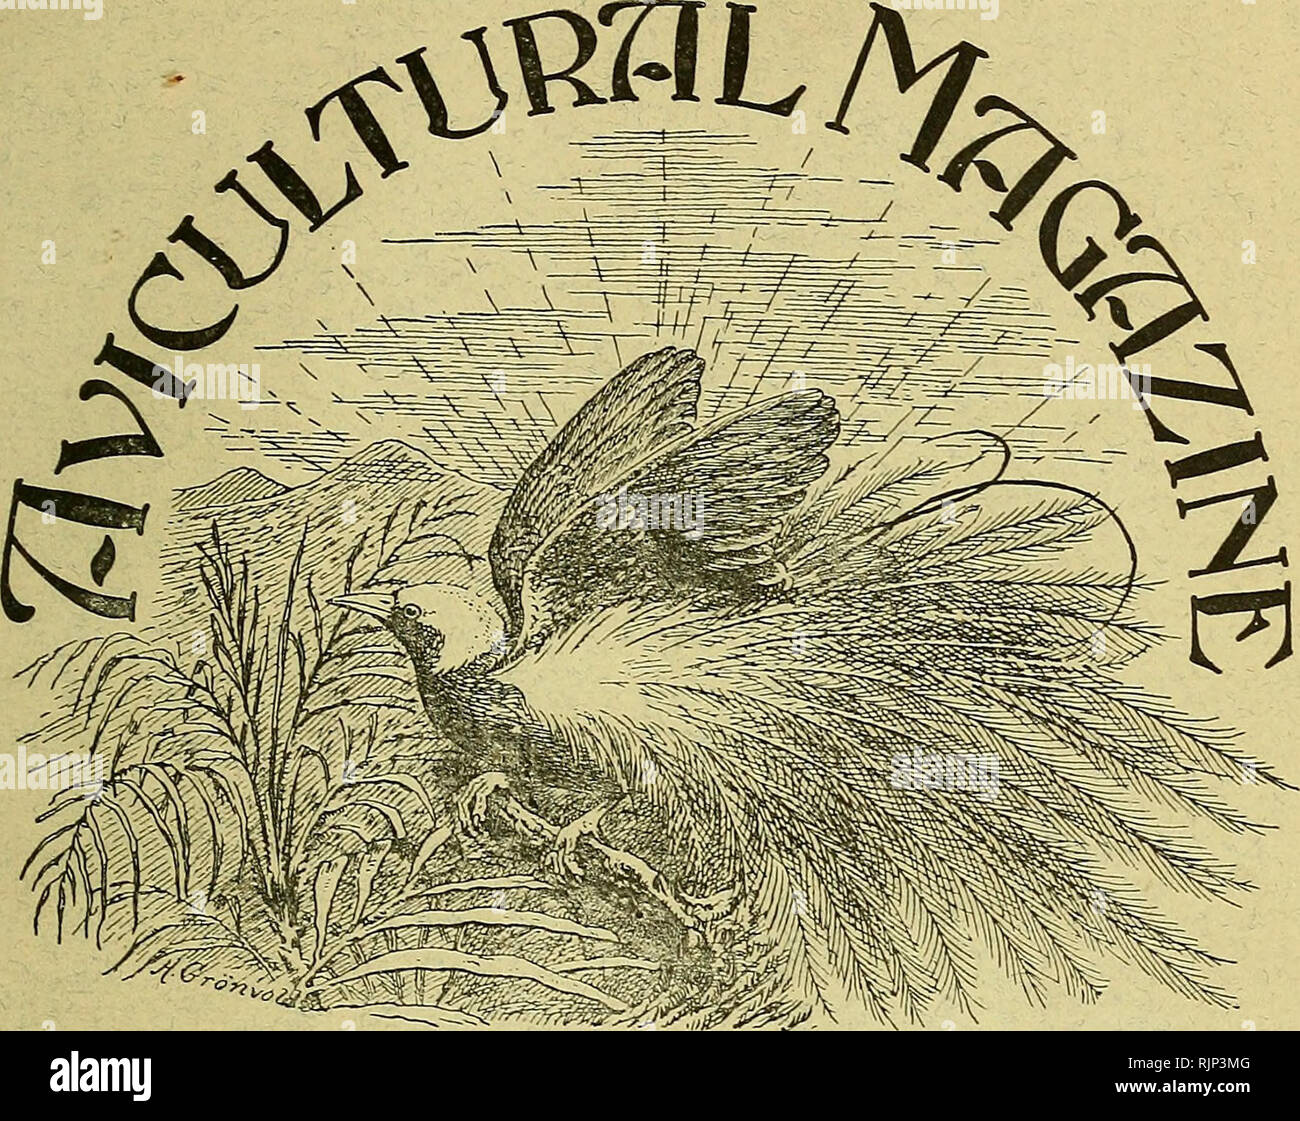 . The Avicultural magazine. Birds; Cage birds. NEW SERIES. Vfi. ill. No. 1. THE PRICE OF THIS NUMBER IS 3/-. NOVEMBER, 1904. Members' Annual Subscription, 10/-; payable in advance. a. THE JOURNAL OF THE AVICULTURAL SOCIETY. -t3 ^CONTENTS.O^ Council Tor the year 1904-5. List of Members Kules of the Avicultural Society Tlie Society's Medal... The Kuropeau Goldfinch {7vith coloured plate) by J LkwiS Bonhote, M.A The Himalayan Goldfinch, by Fkank Finn, B.A. The Nesting- of Fraser's Tonracou {illustrated by Mrs, Johnstone Recollections of some Bird Friends, by Miss 1). Hamilton Breeding- Passerin Stock Photo